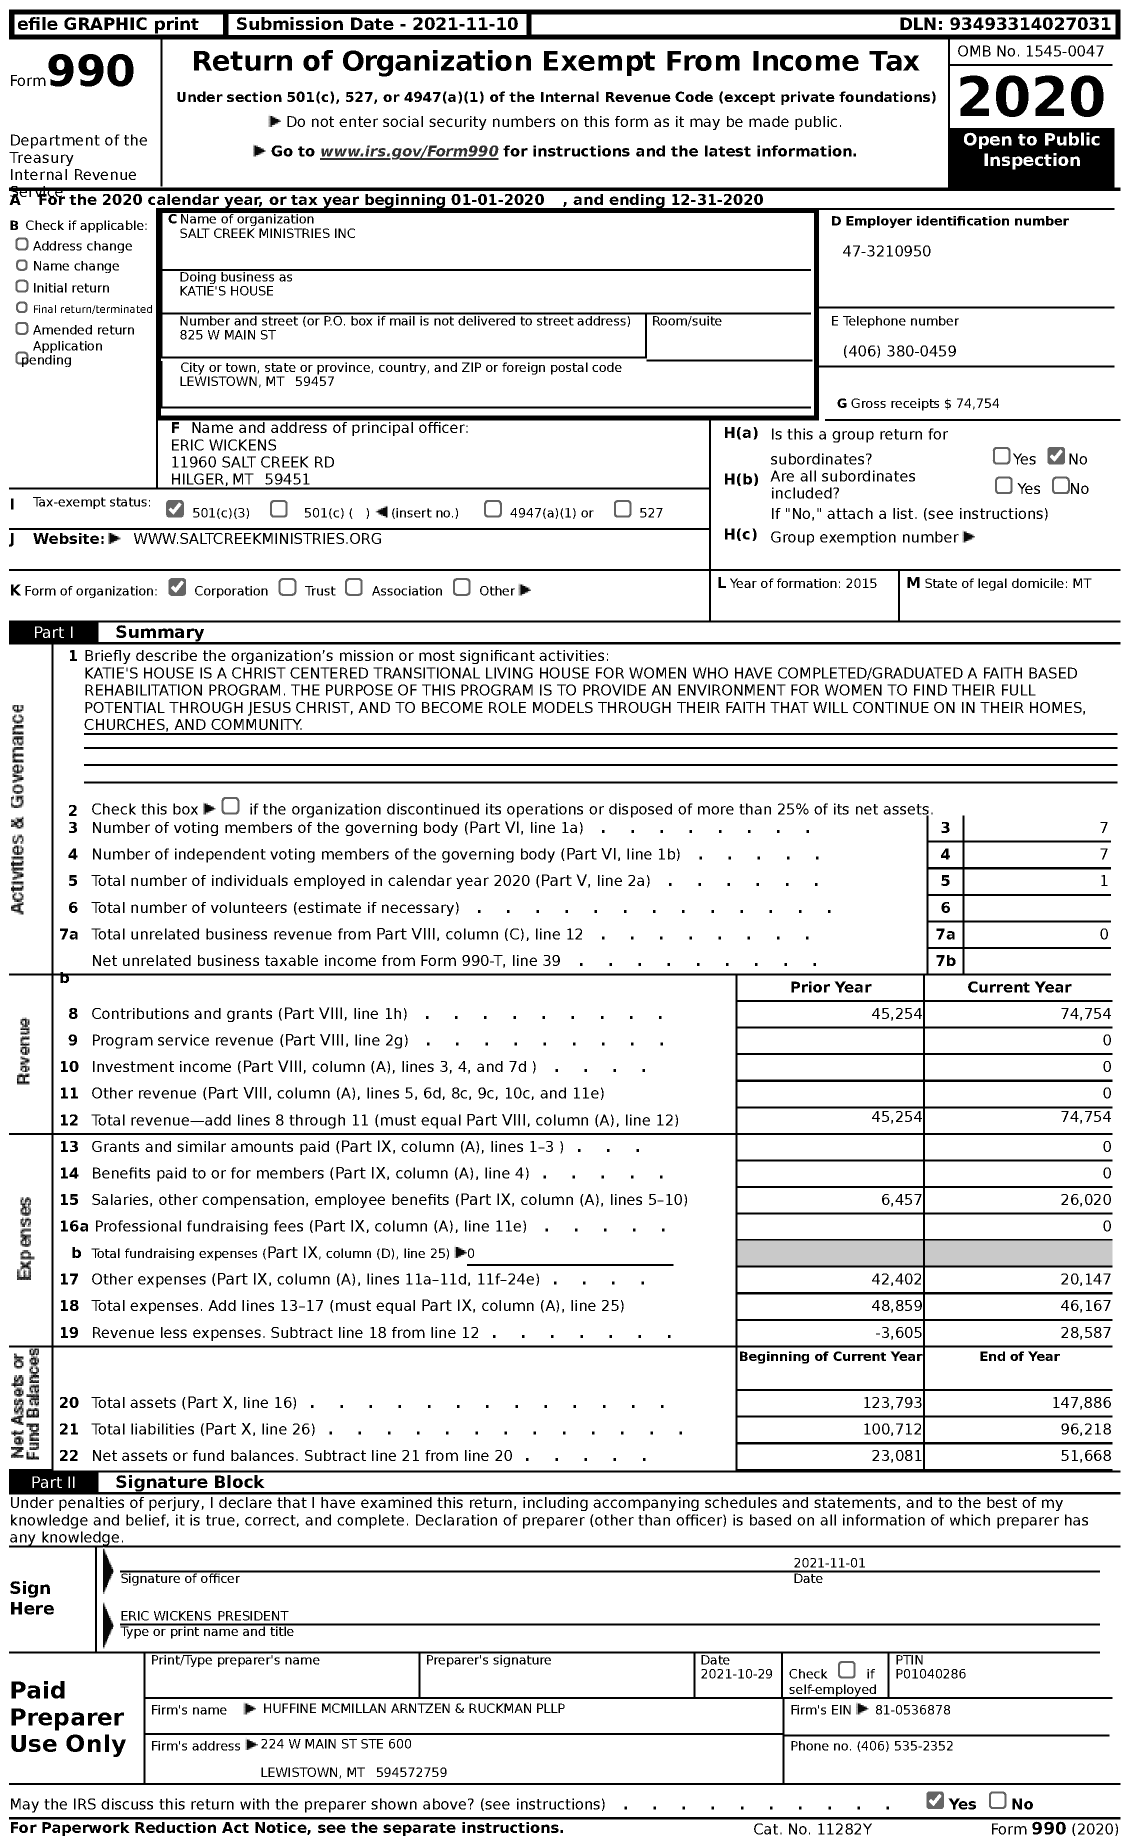 Image of first page of 2020 Form 990 for Katie's House / Salt Creek Ministries Inc